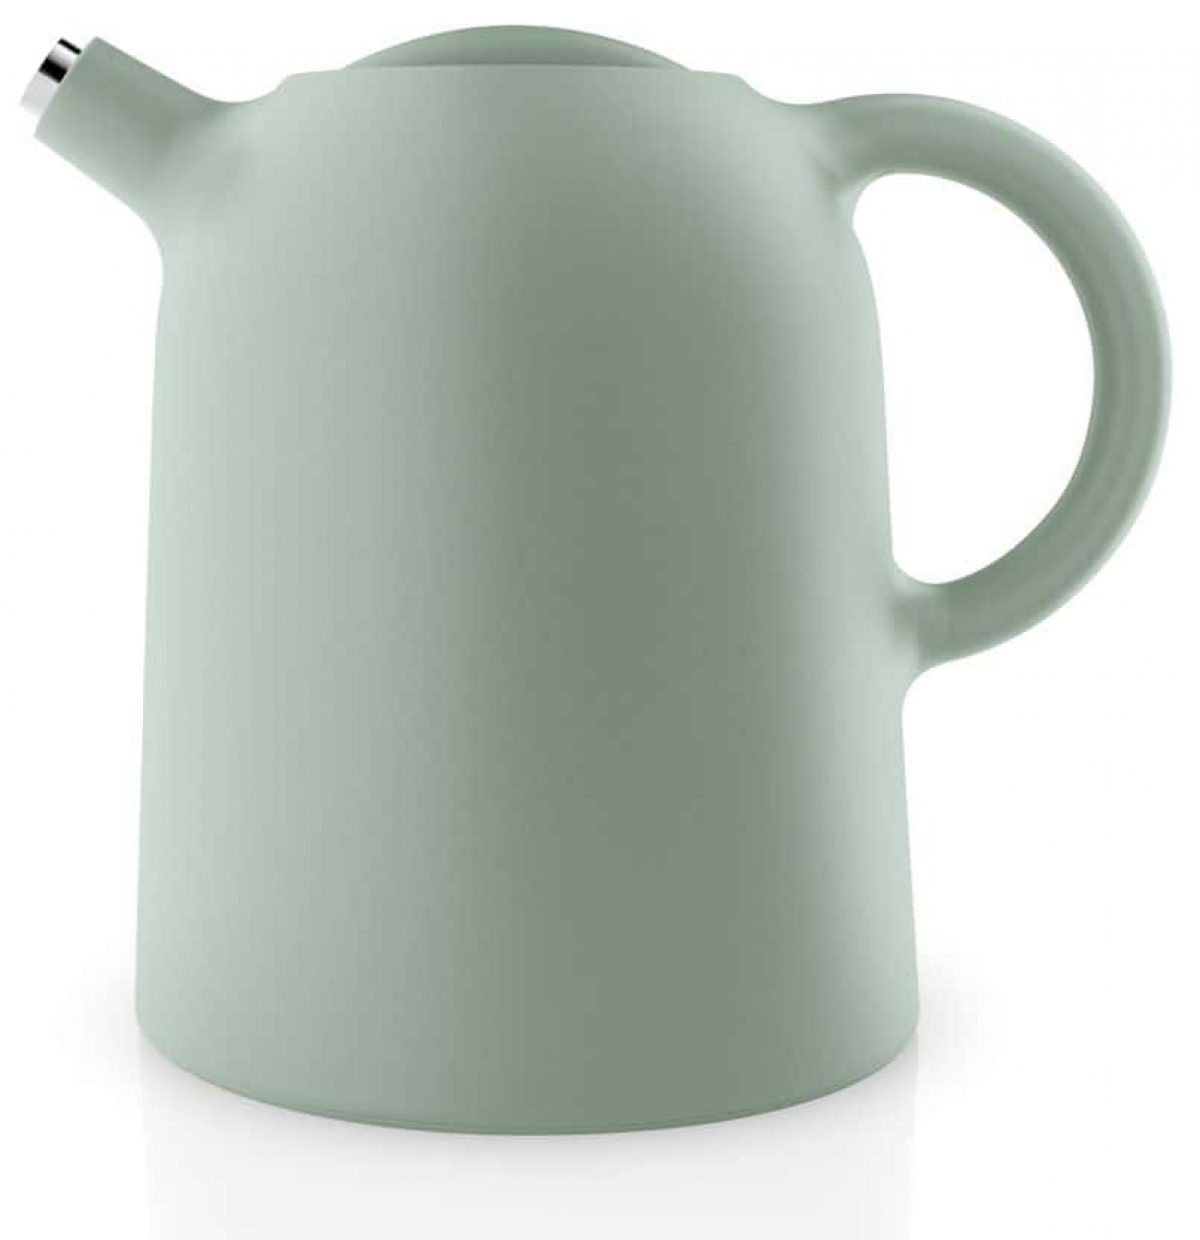 betaling Agnes Gray geeuwen Eva Solo - Thermoskan Thimble - faded green - 1 ltr - K'OOK!